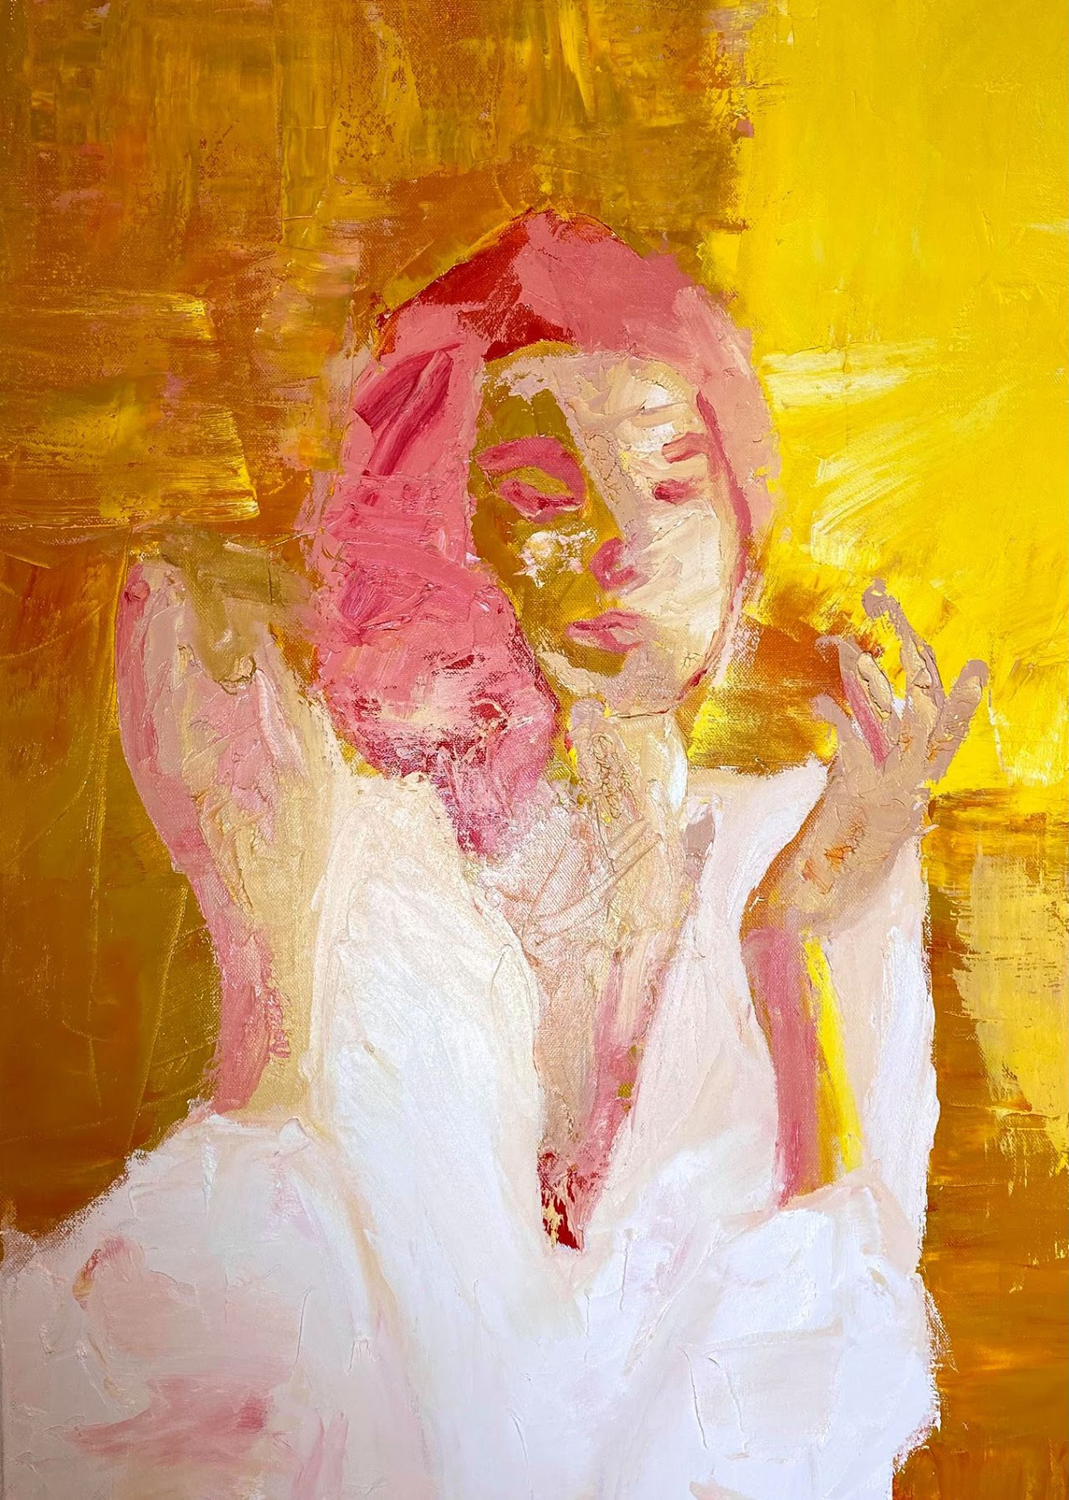 Abstract portrait of woman bearing hands, red and yellow streaks to create a form